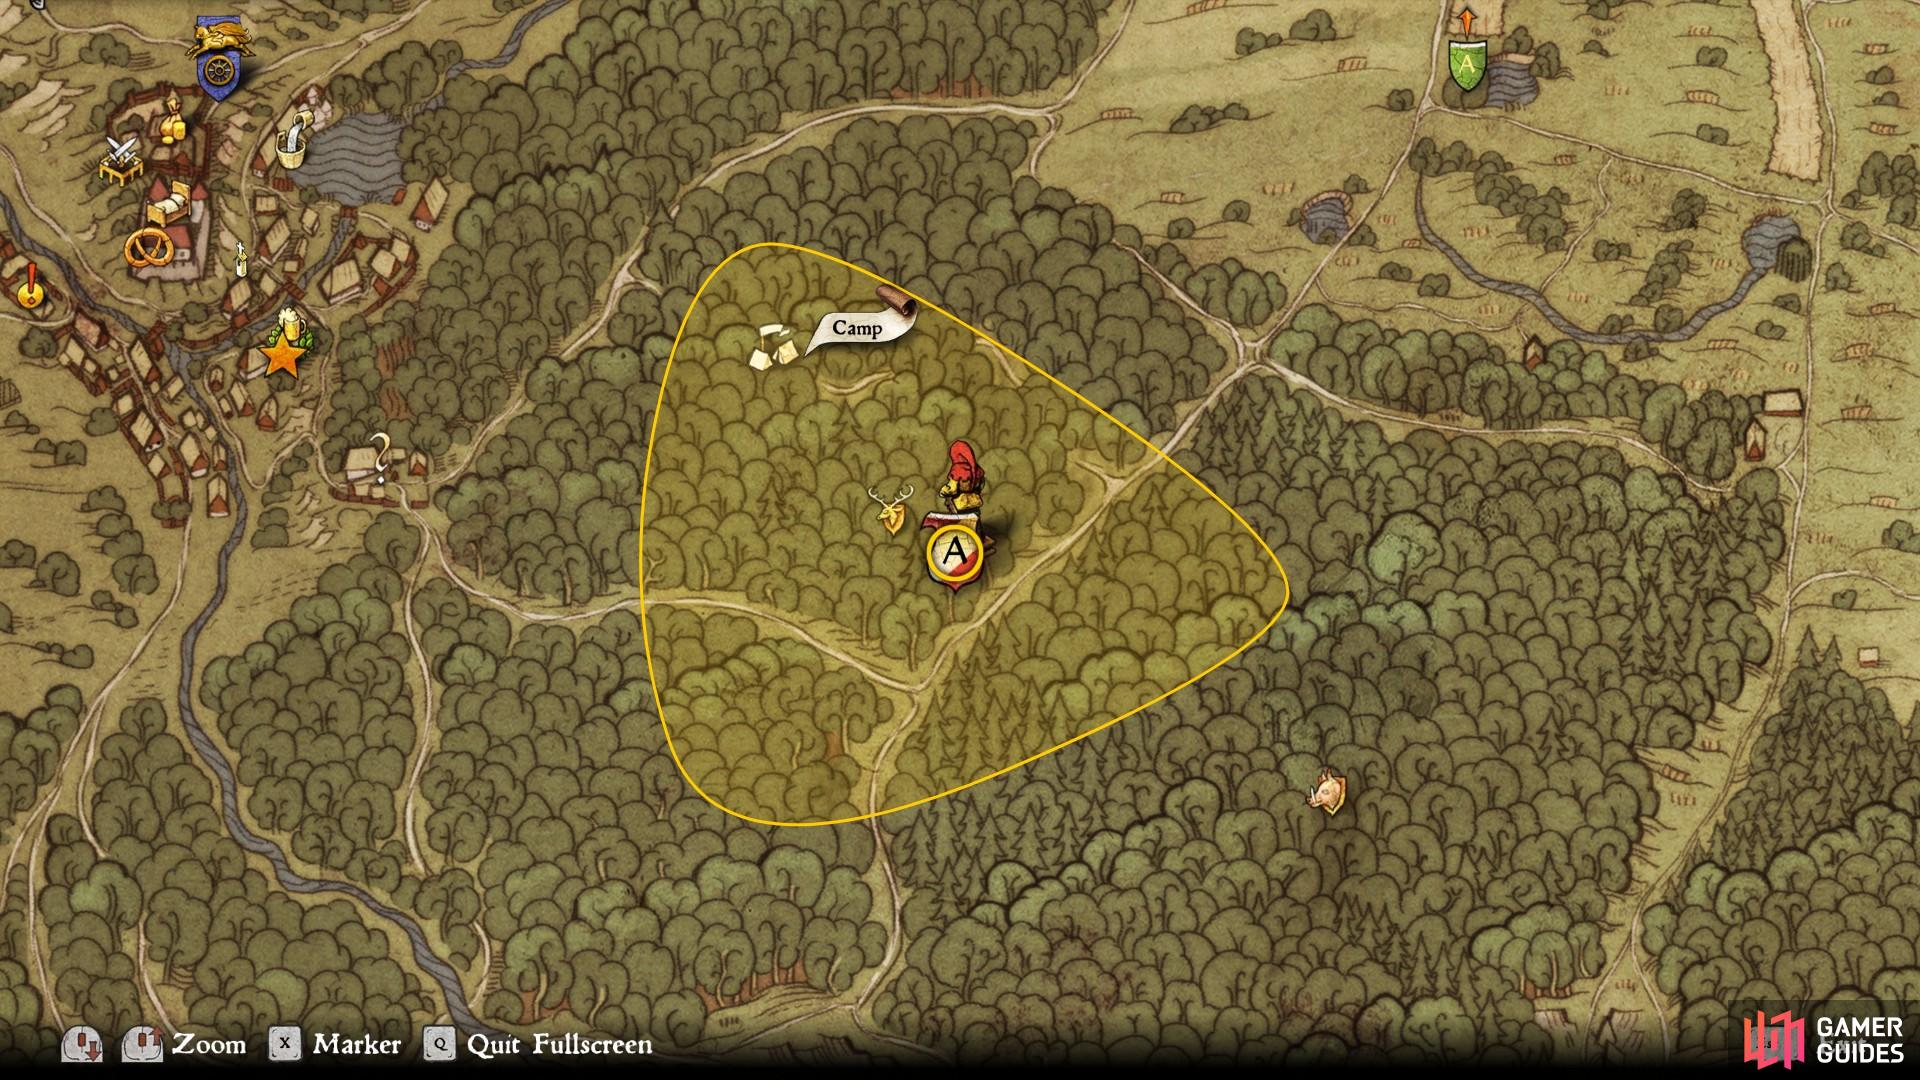 Lord Capon can be found at the camp within the highlighted region on the map.